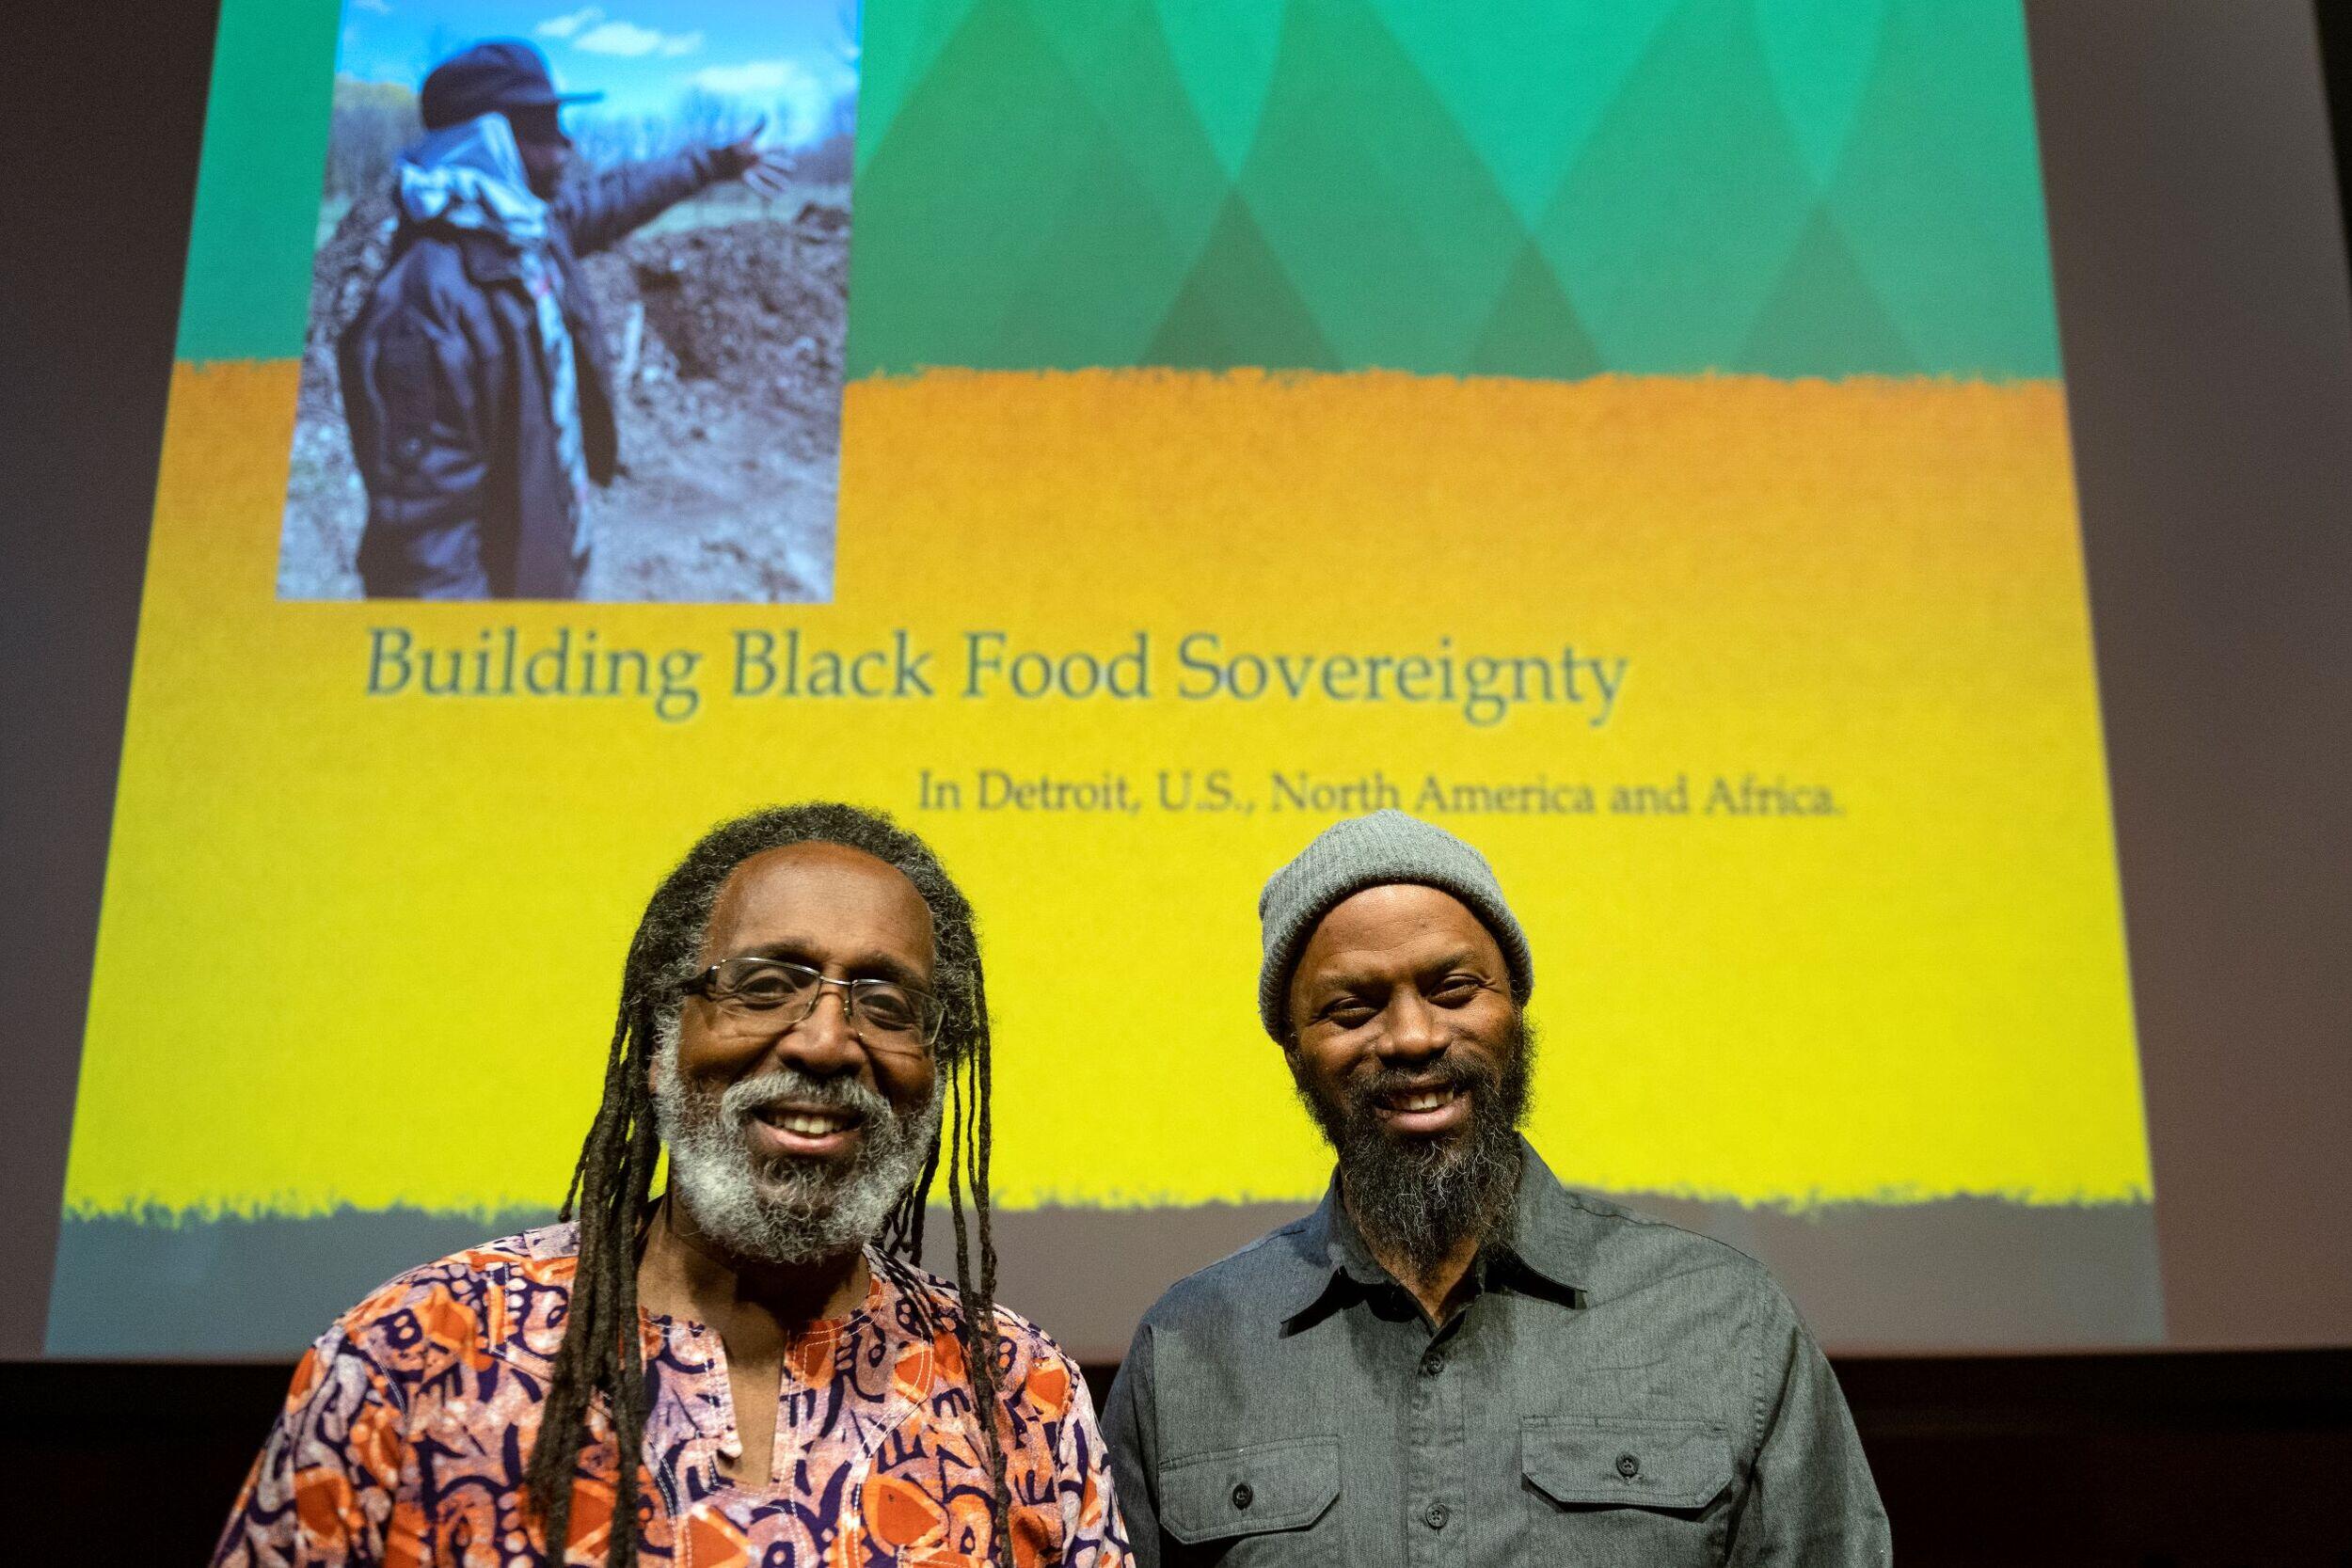 Two men standing in front of a screen that says \"Building Black Food Sovereignty in Detroit, U.S., North America and Africa\"